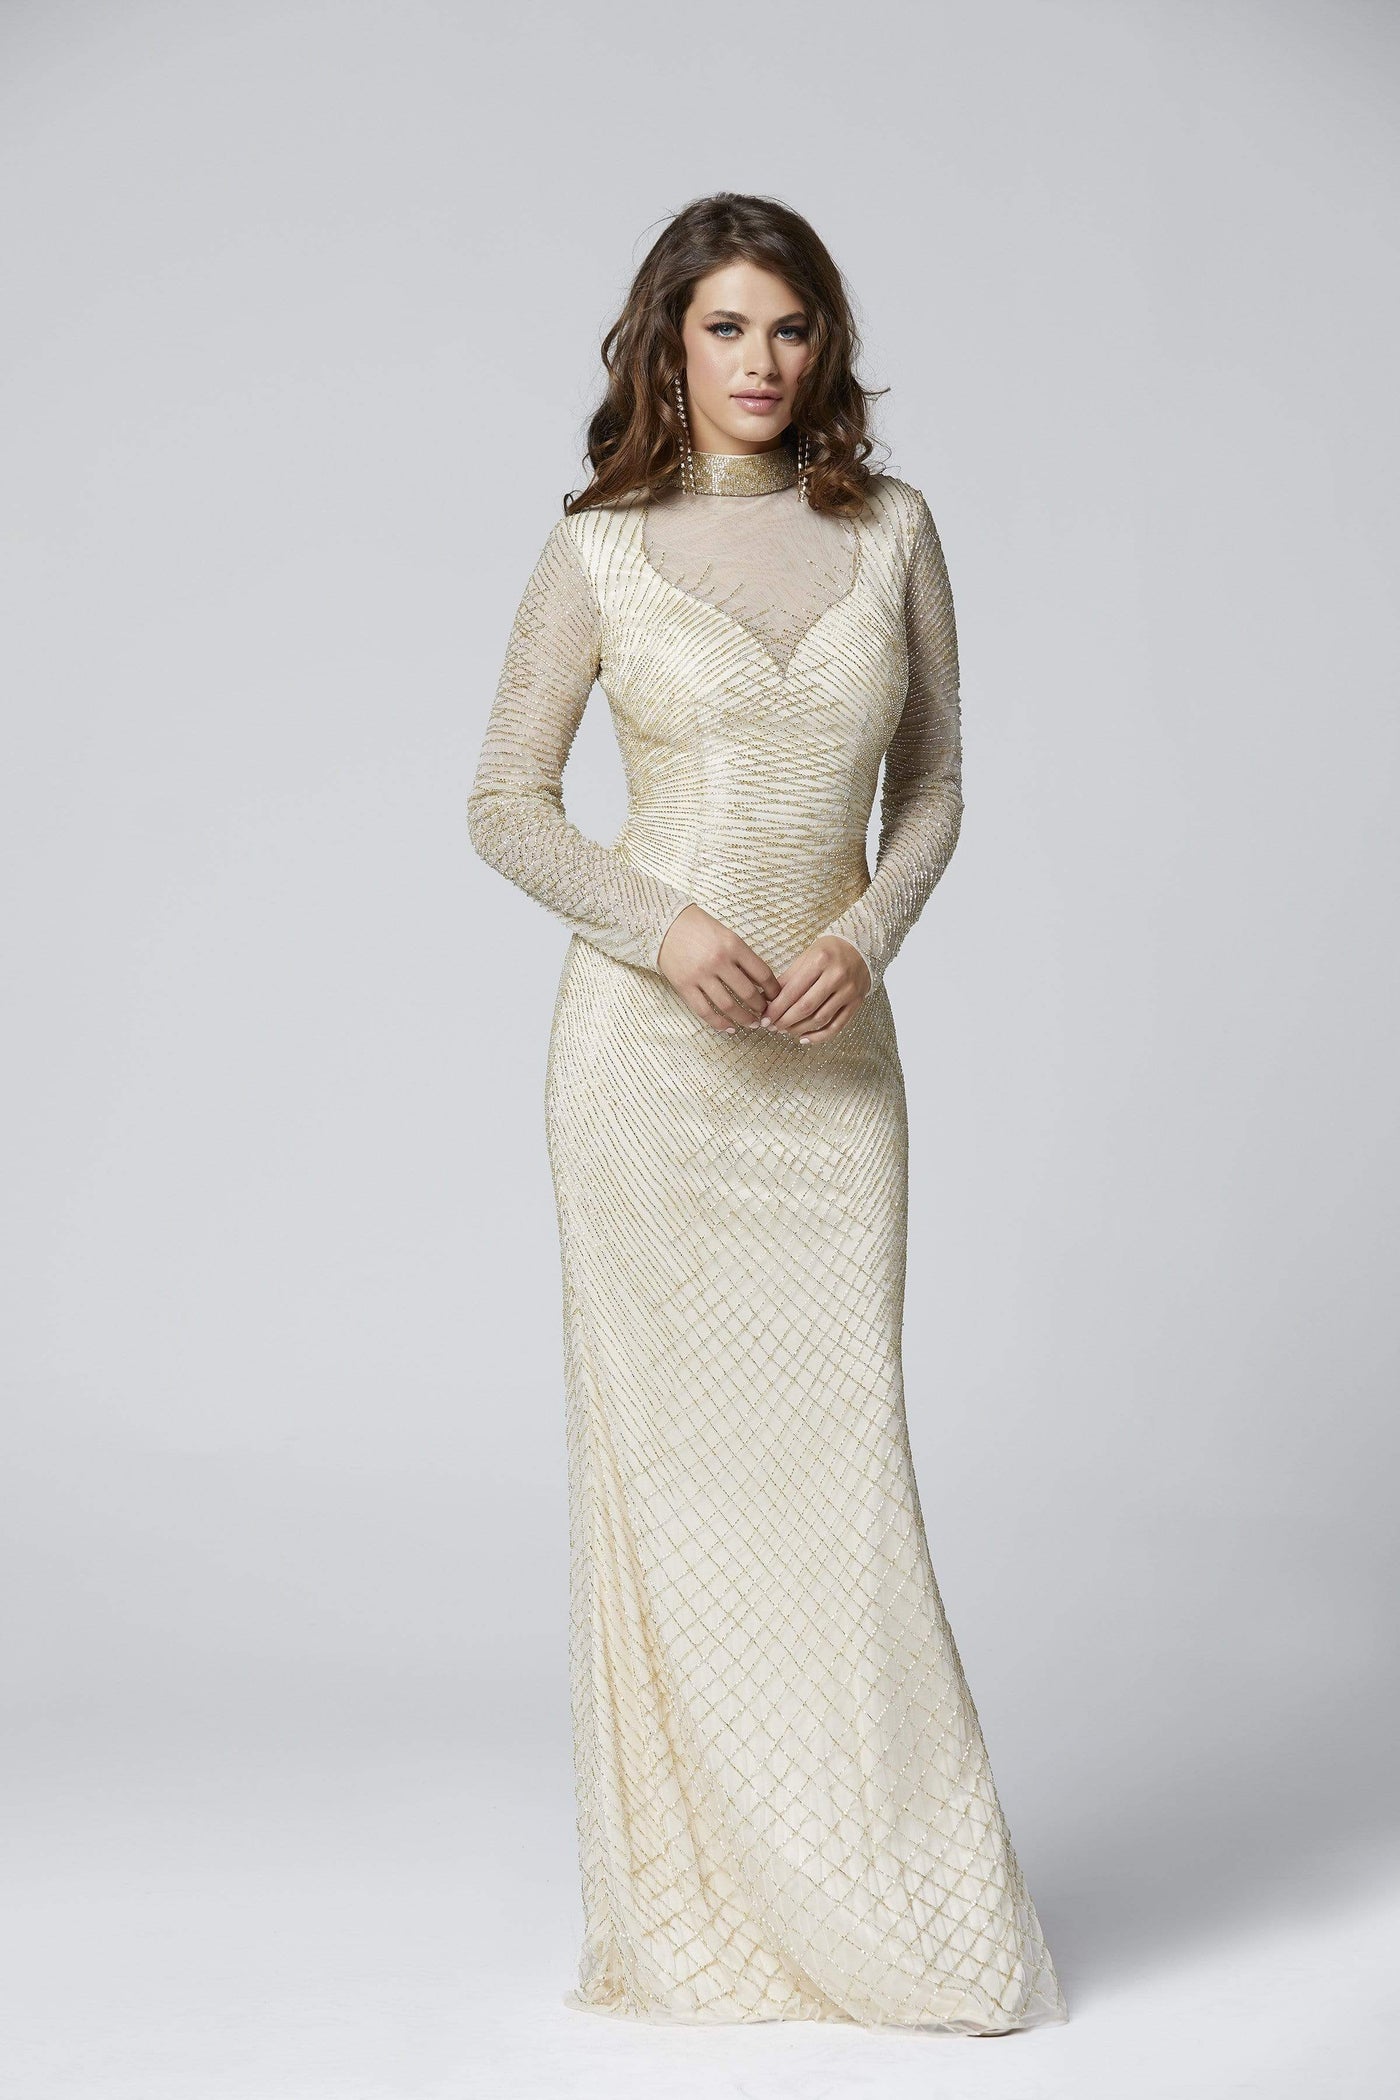 Primavera Couture - 3370 Beaded Long Sleeve High Neck Sheath Dress Special Occasion Dress 2 / Nude Gold